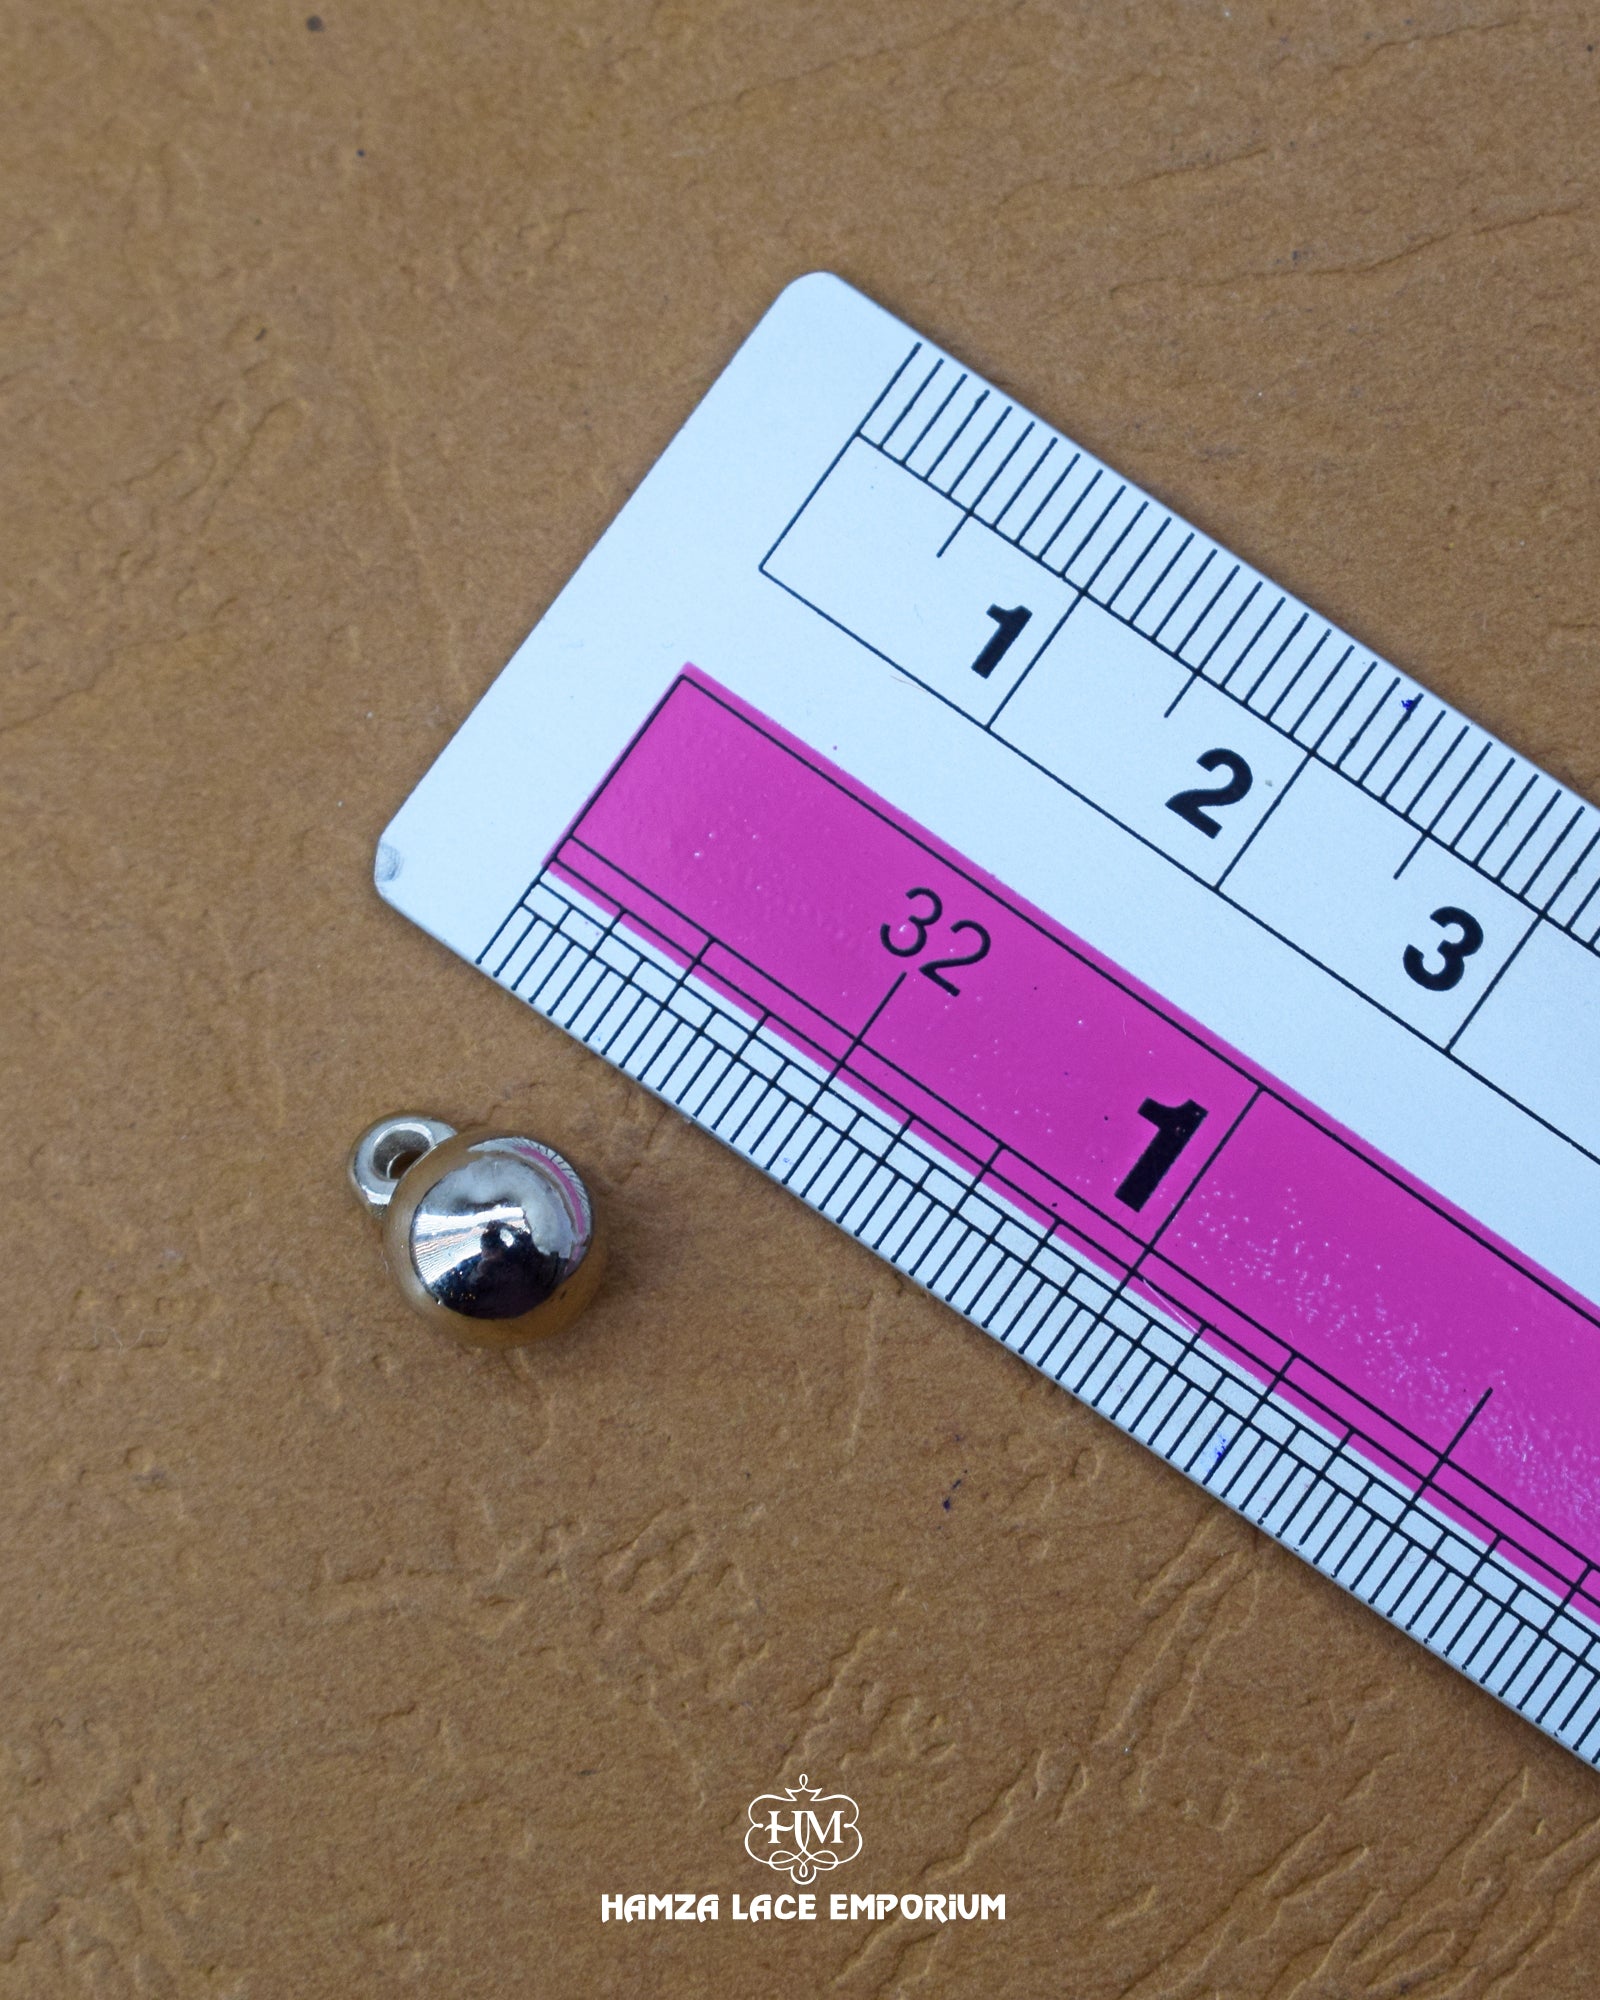 The size of the 'Metal Button MB802' is measured using a ruler.